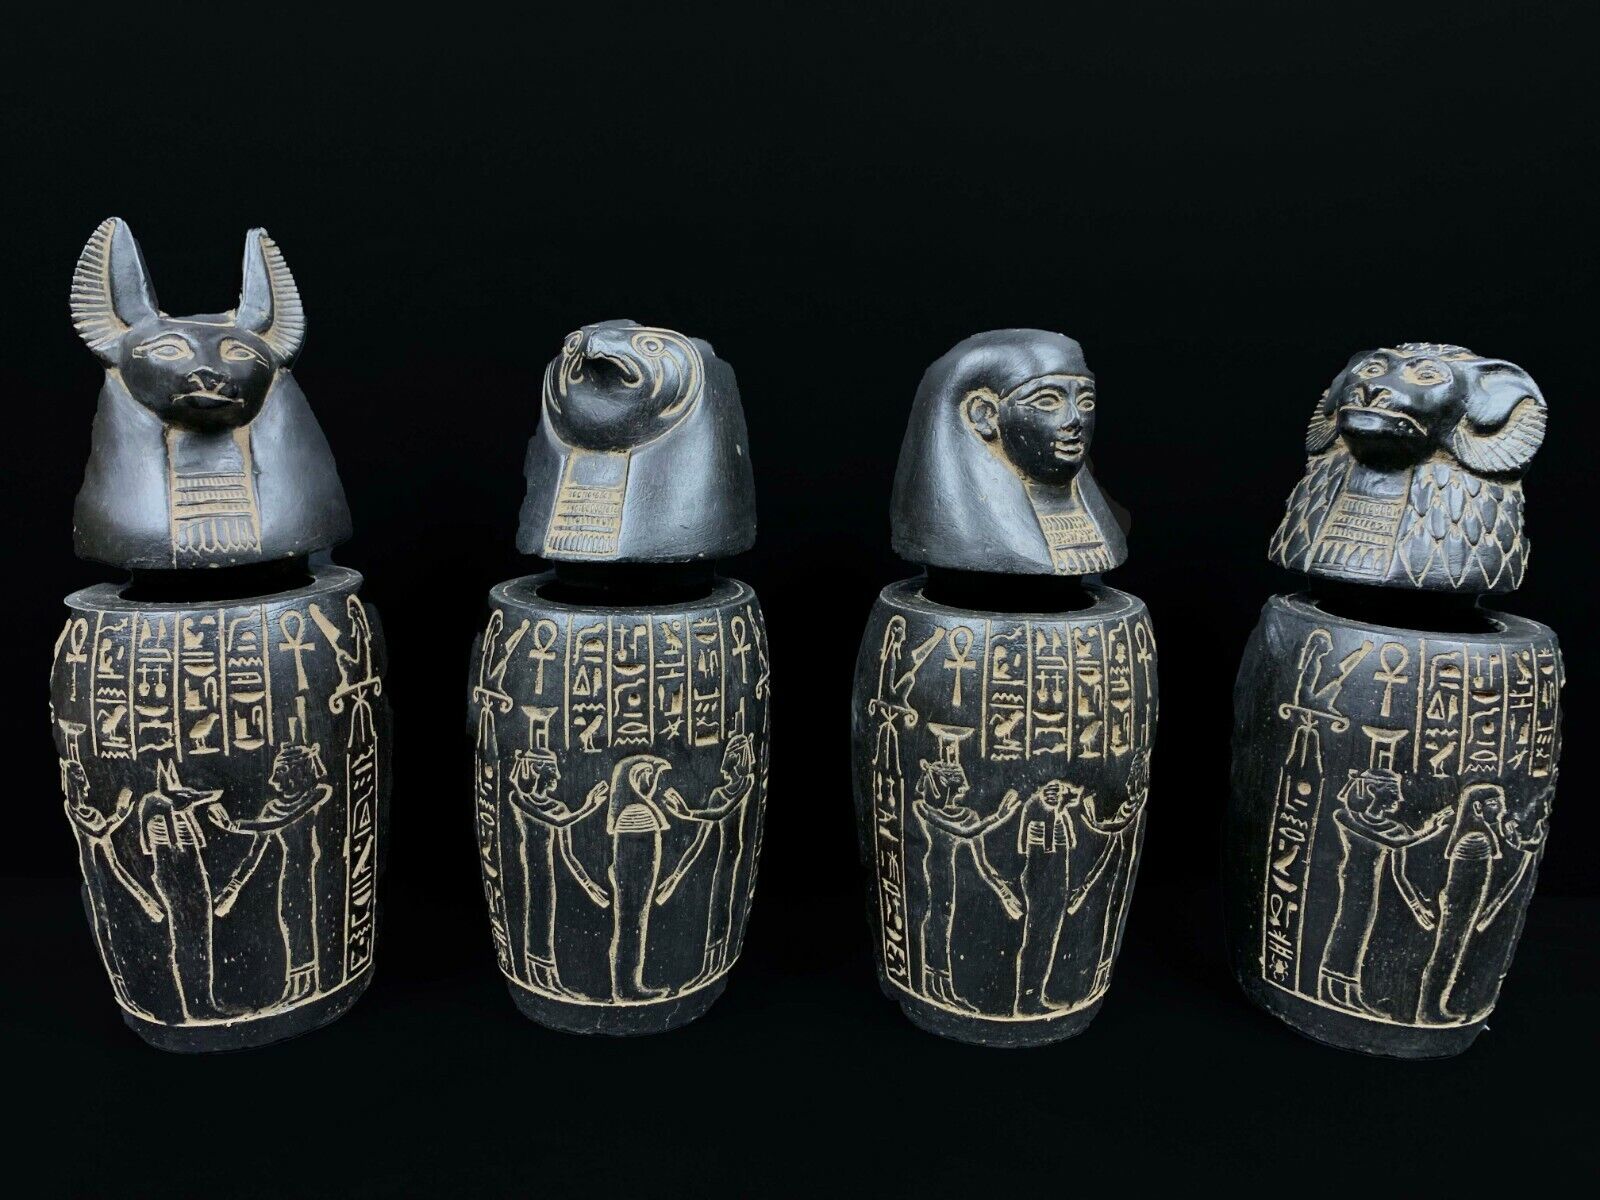 Marvelous Canopic jars - The Four fantastic Canopic Jars made for you